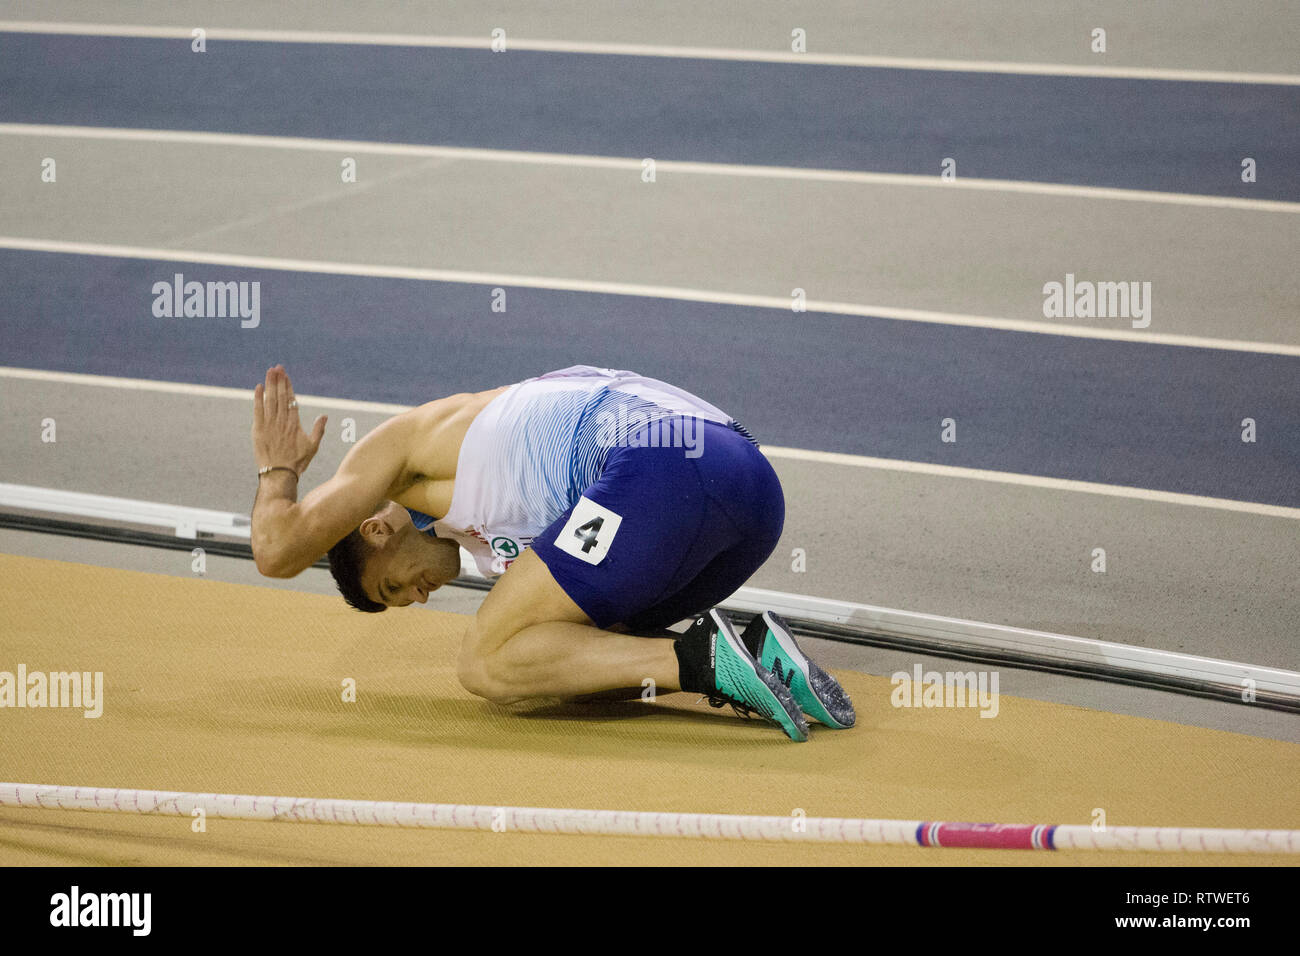 Glasgow, UK. 02nd Mar, 2019. Glasgow, Scotland - March 2: Learmonth Guy of GBR during semi-final 2 of the Mens 800m on day 2 of the European Indoor Athletics Championships at the Emirates Arena in Glasgow, Scotland. ( Credit: Scottish Borders Media/Alamy Live News Stock Photo